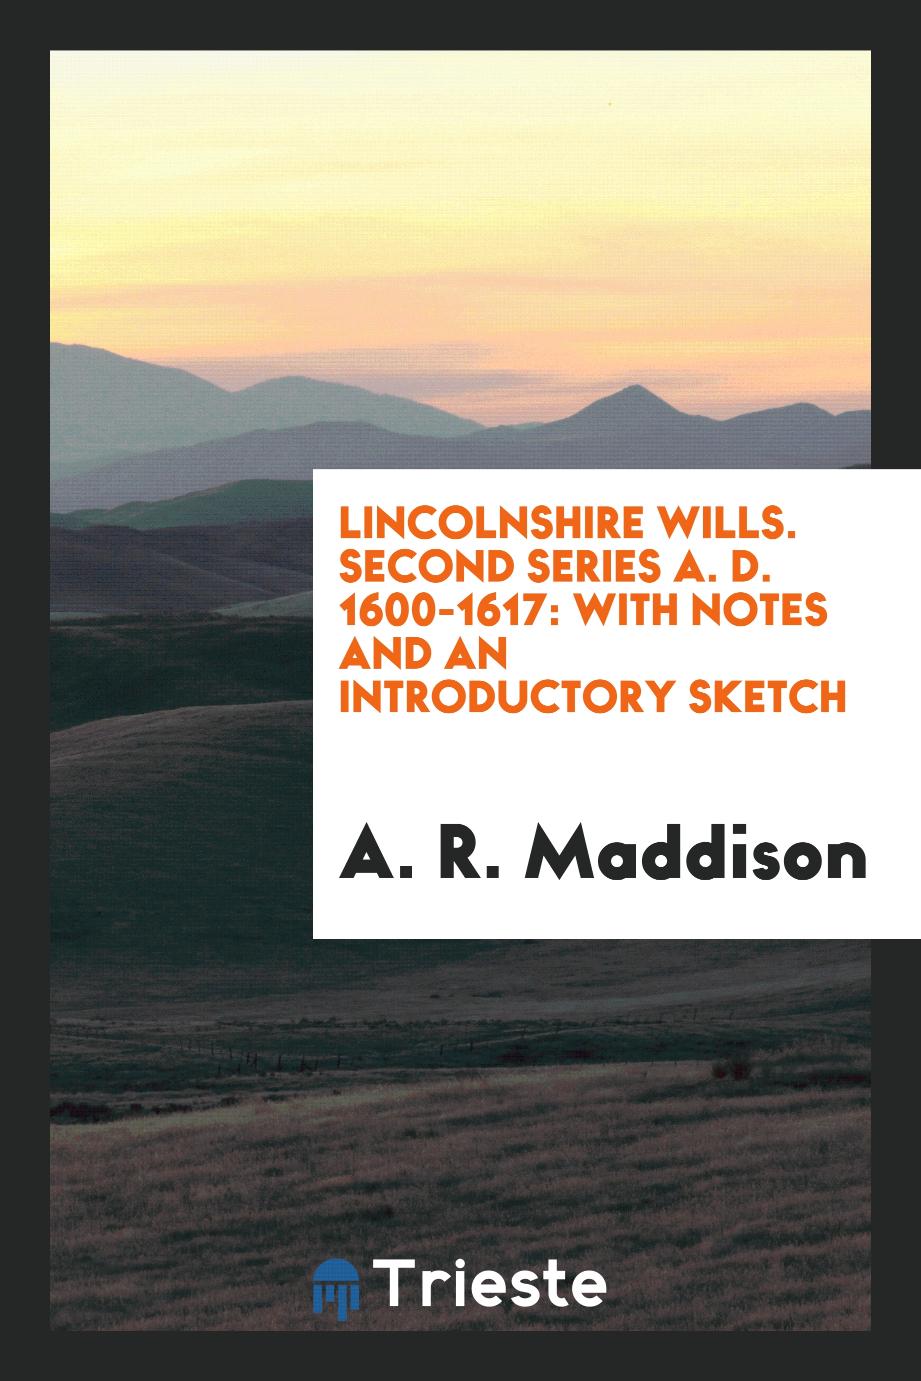 Lincolnshire Wills. Second Series A. D. 1600-1617: With Notes and an Introductory Sketch